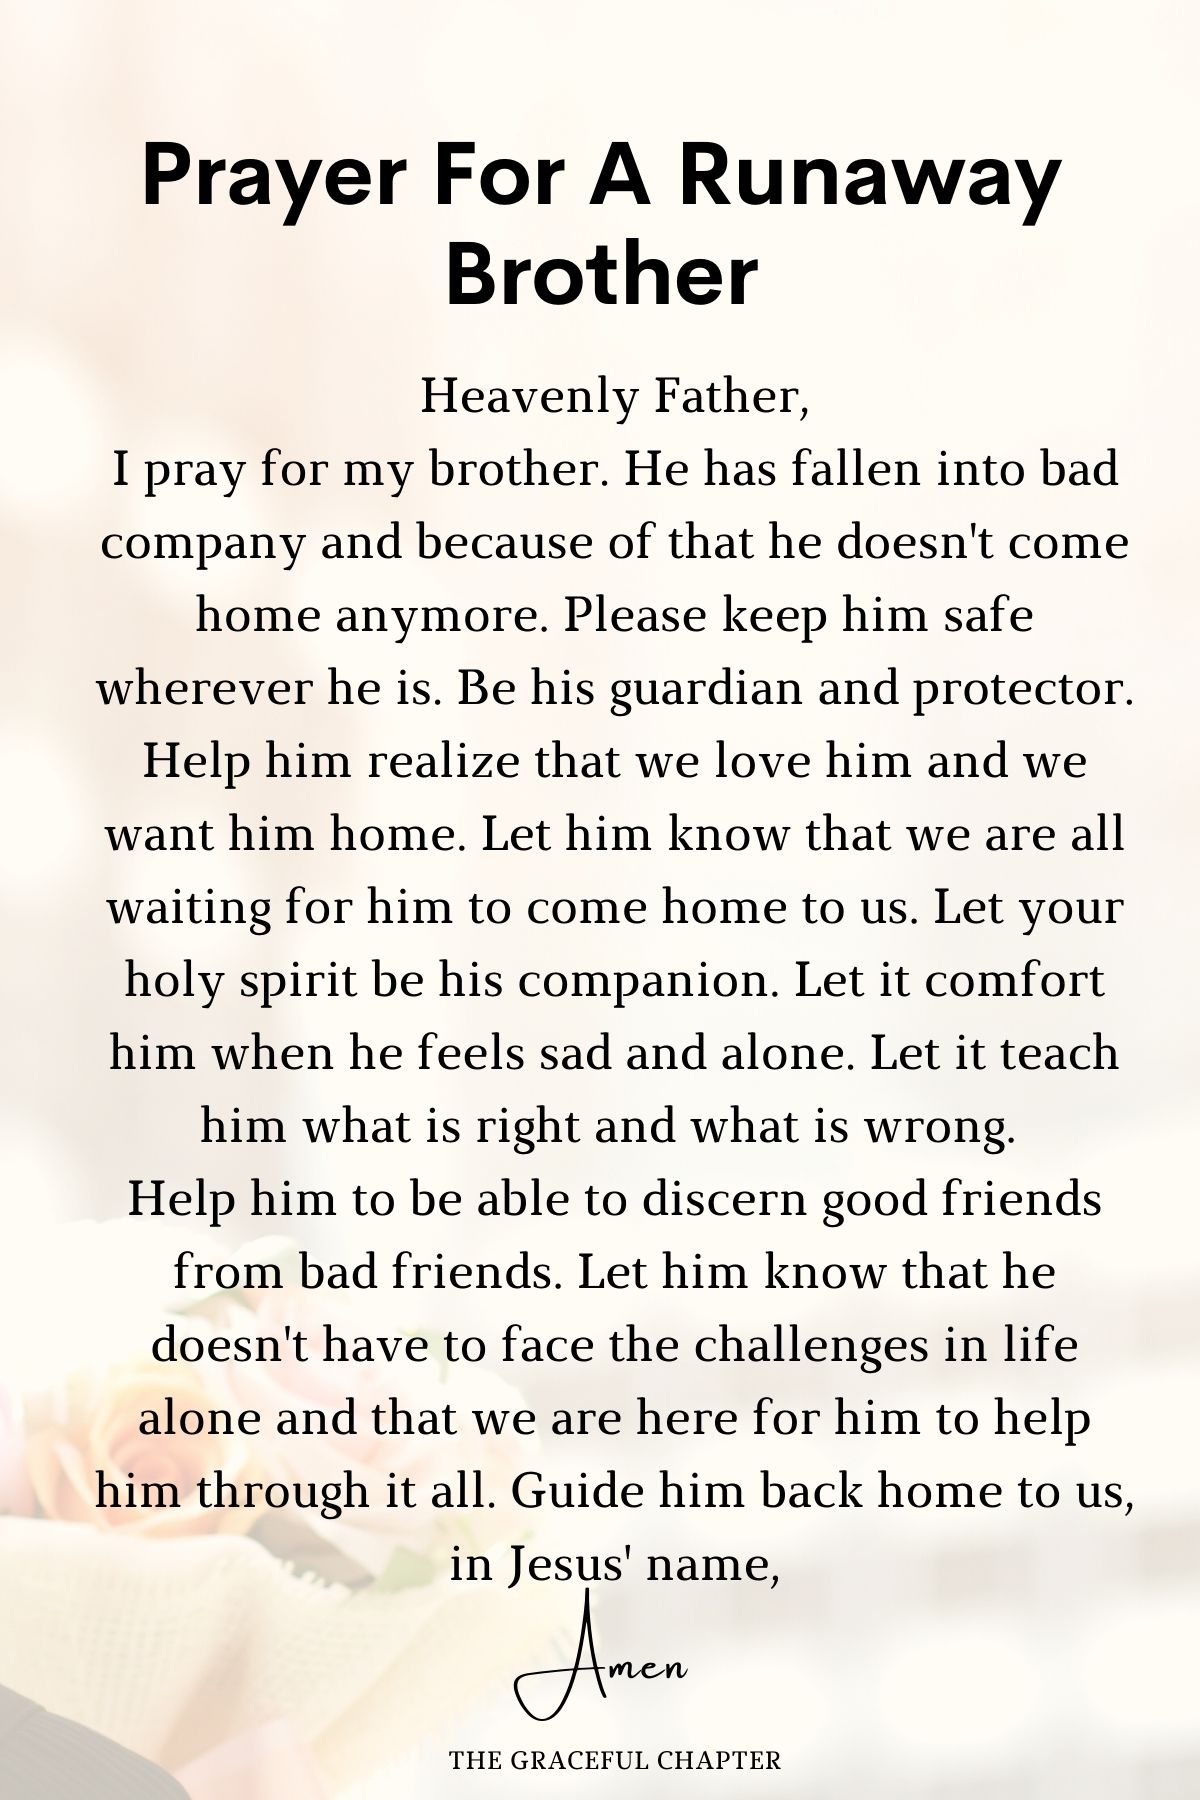 Prayer for a runaway brother